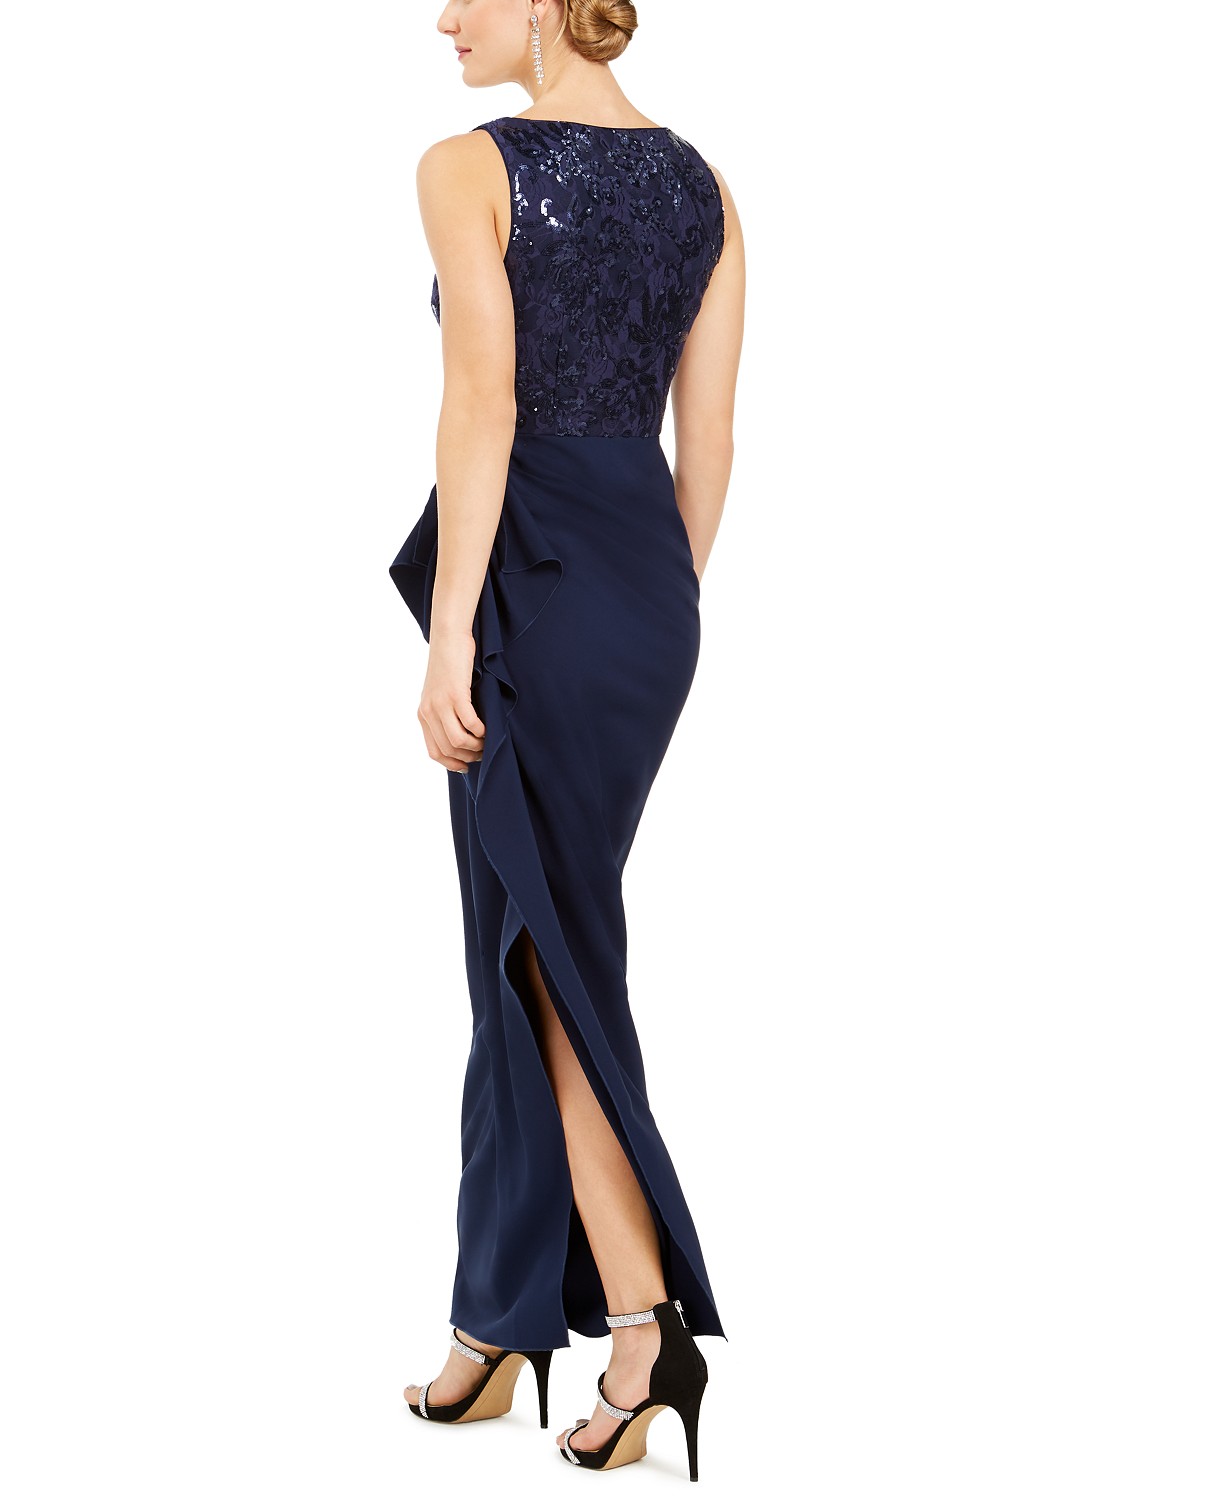 woocommerce-673321-2209615.cloudwaysapps.com-vince-camuto-womens-navy-side-ruched-v-neck-gown-dress